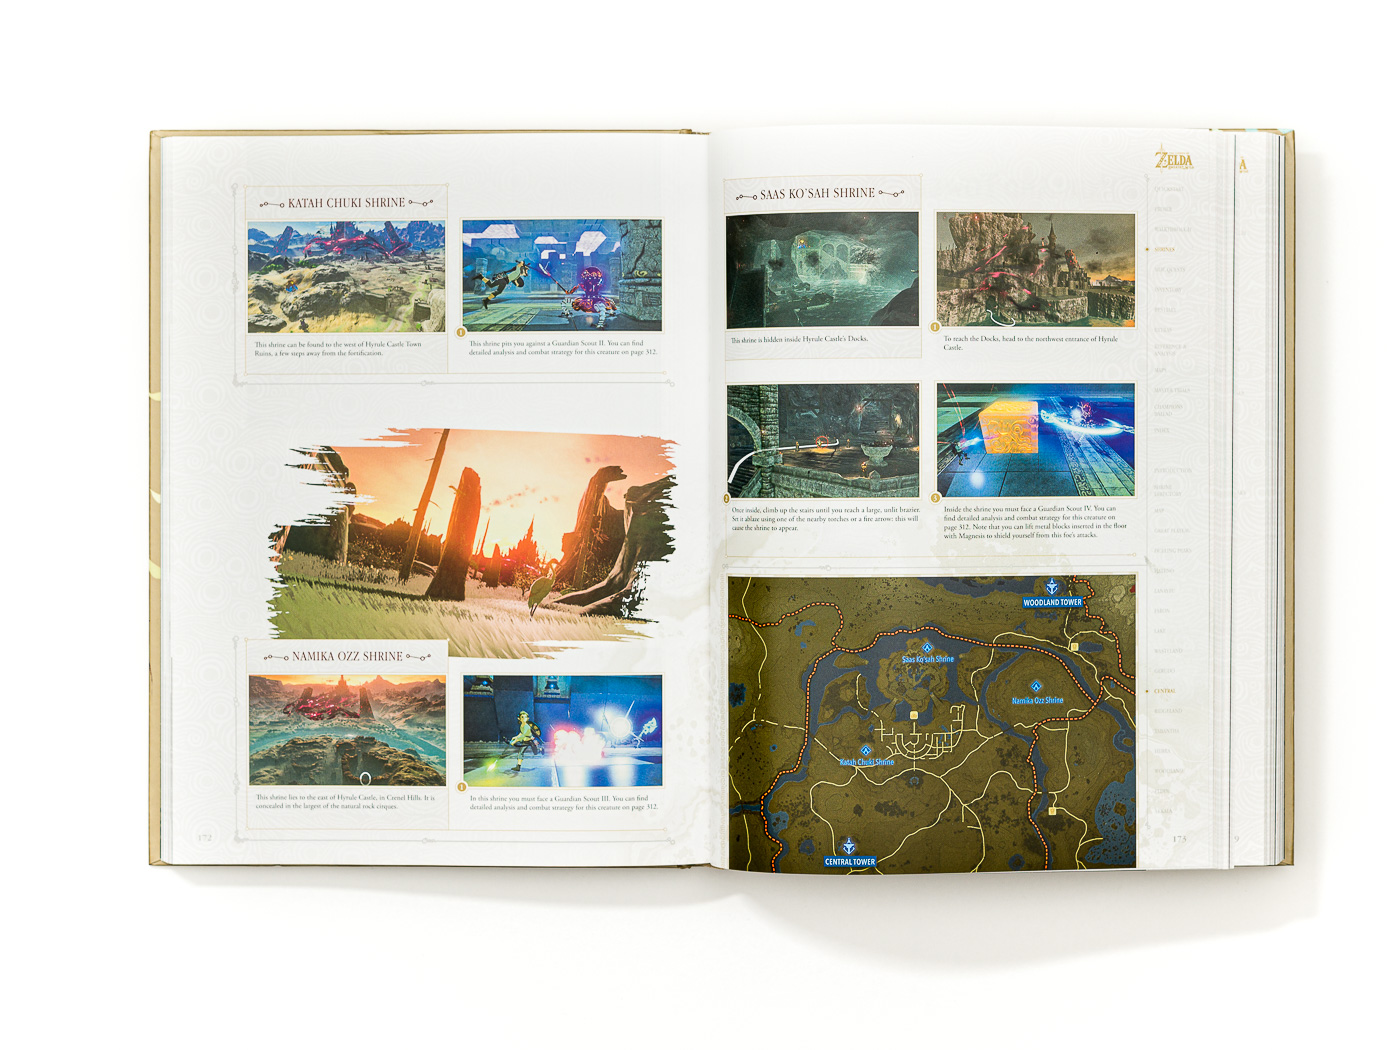 Zelda Breath of the Wild Guide - Free stories online. Create books for  kids